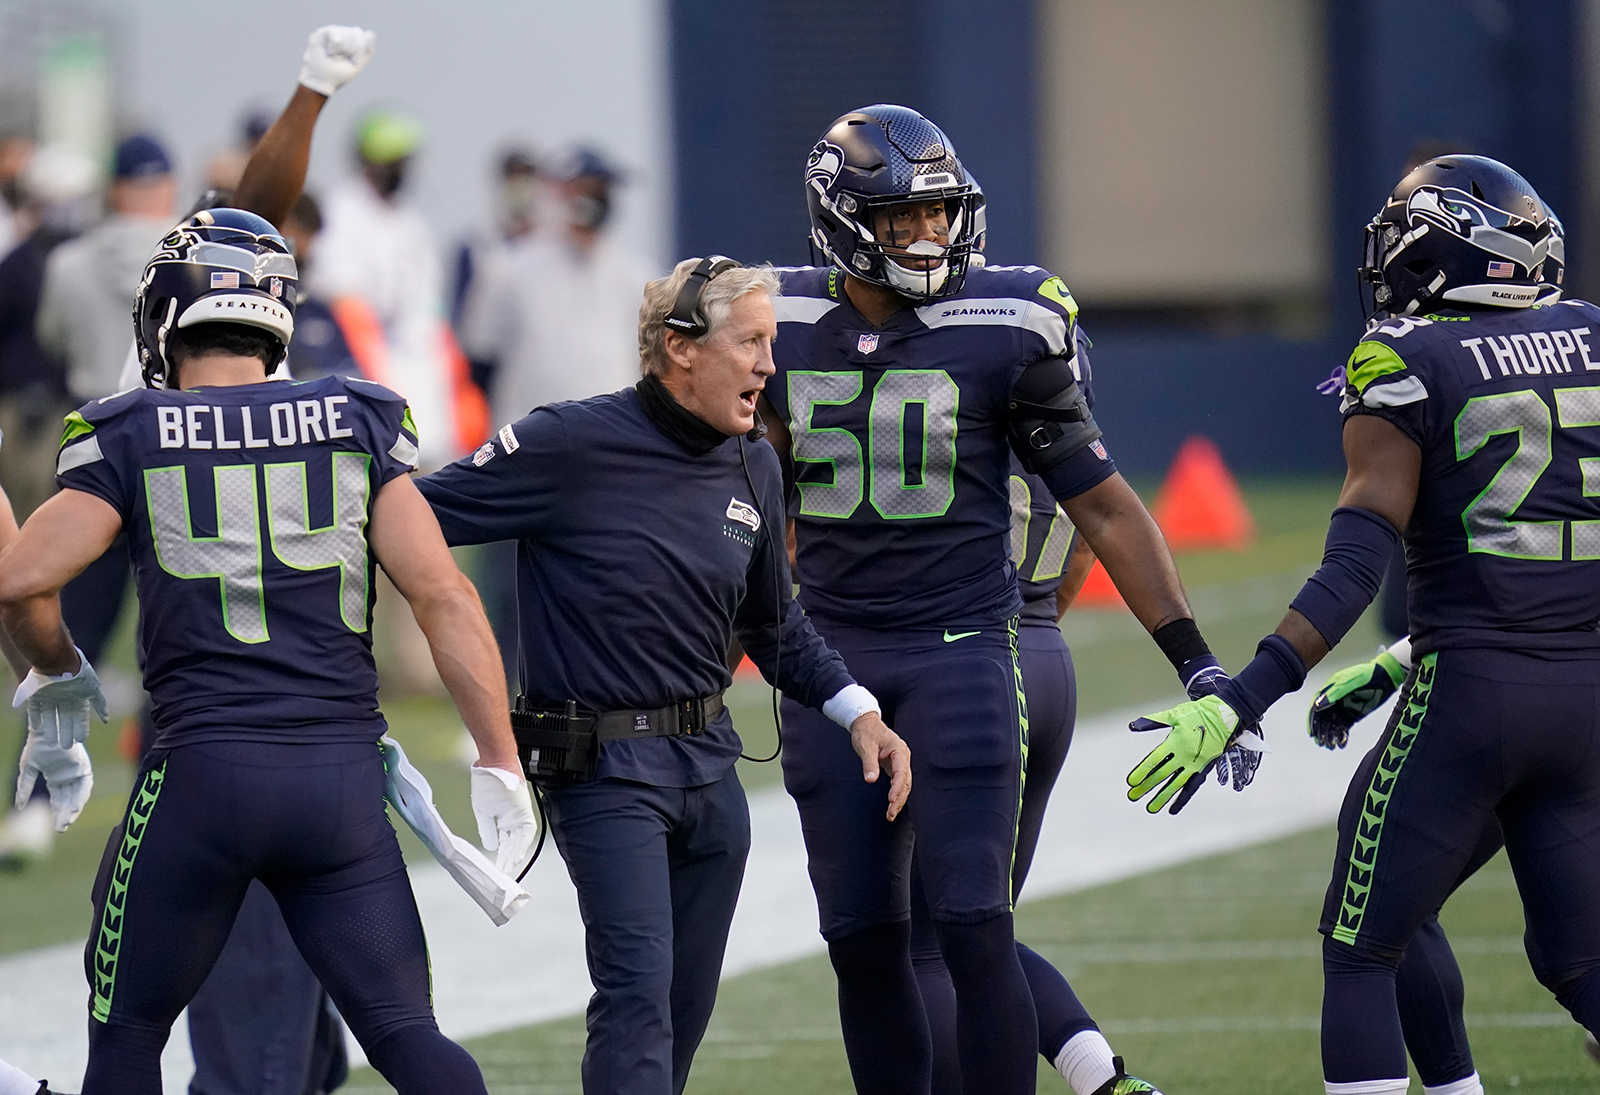 Seattle Seahawks head coach Pete Carroll celebrates with outside linebacker K.J. Wright (50) after wide receiver DK Metcalf scored a touchdown against the New England Patriots during the first half of an NFL football game, in Seattle, on September, 20.